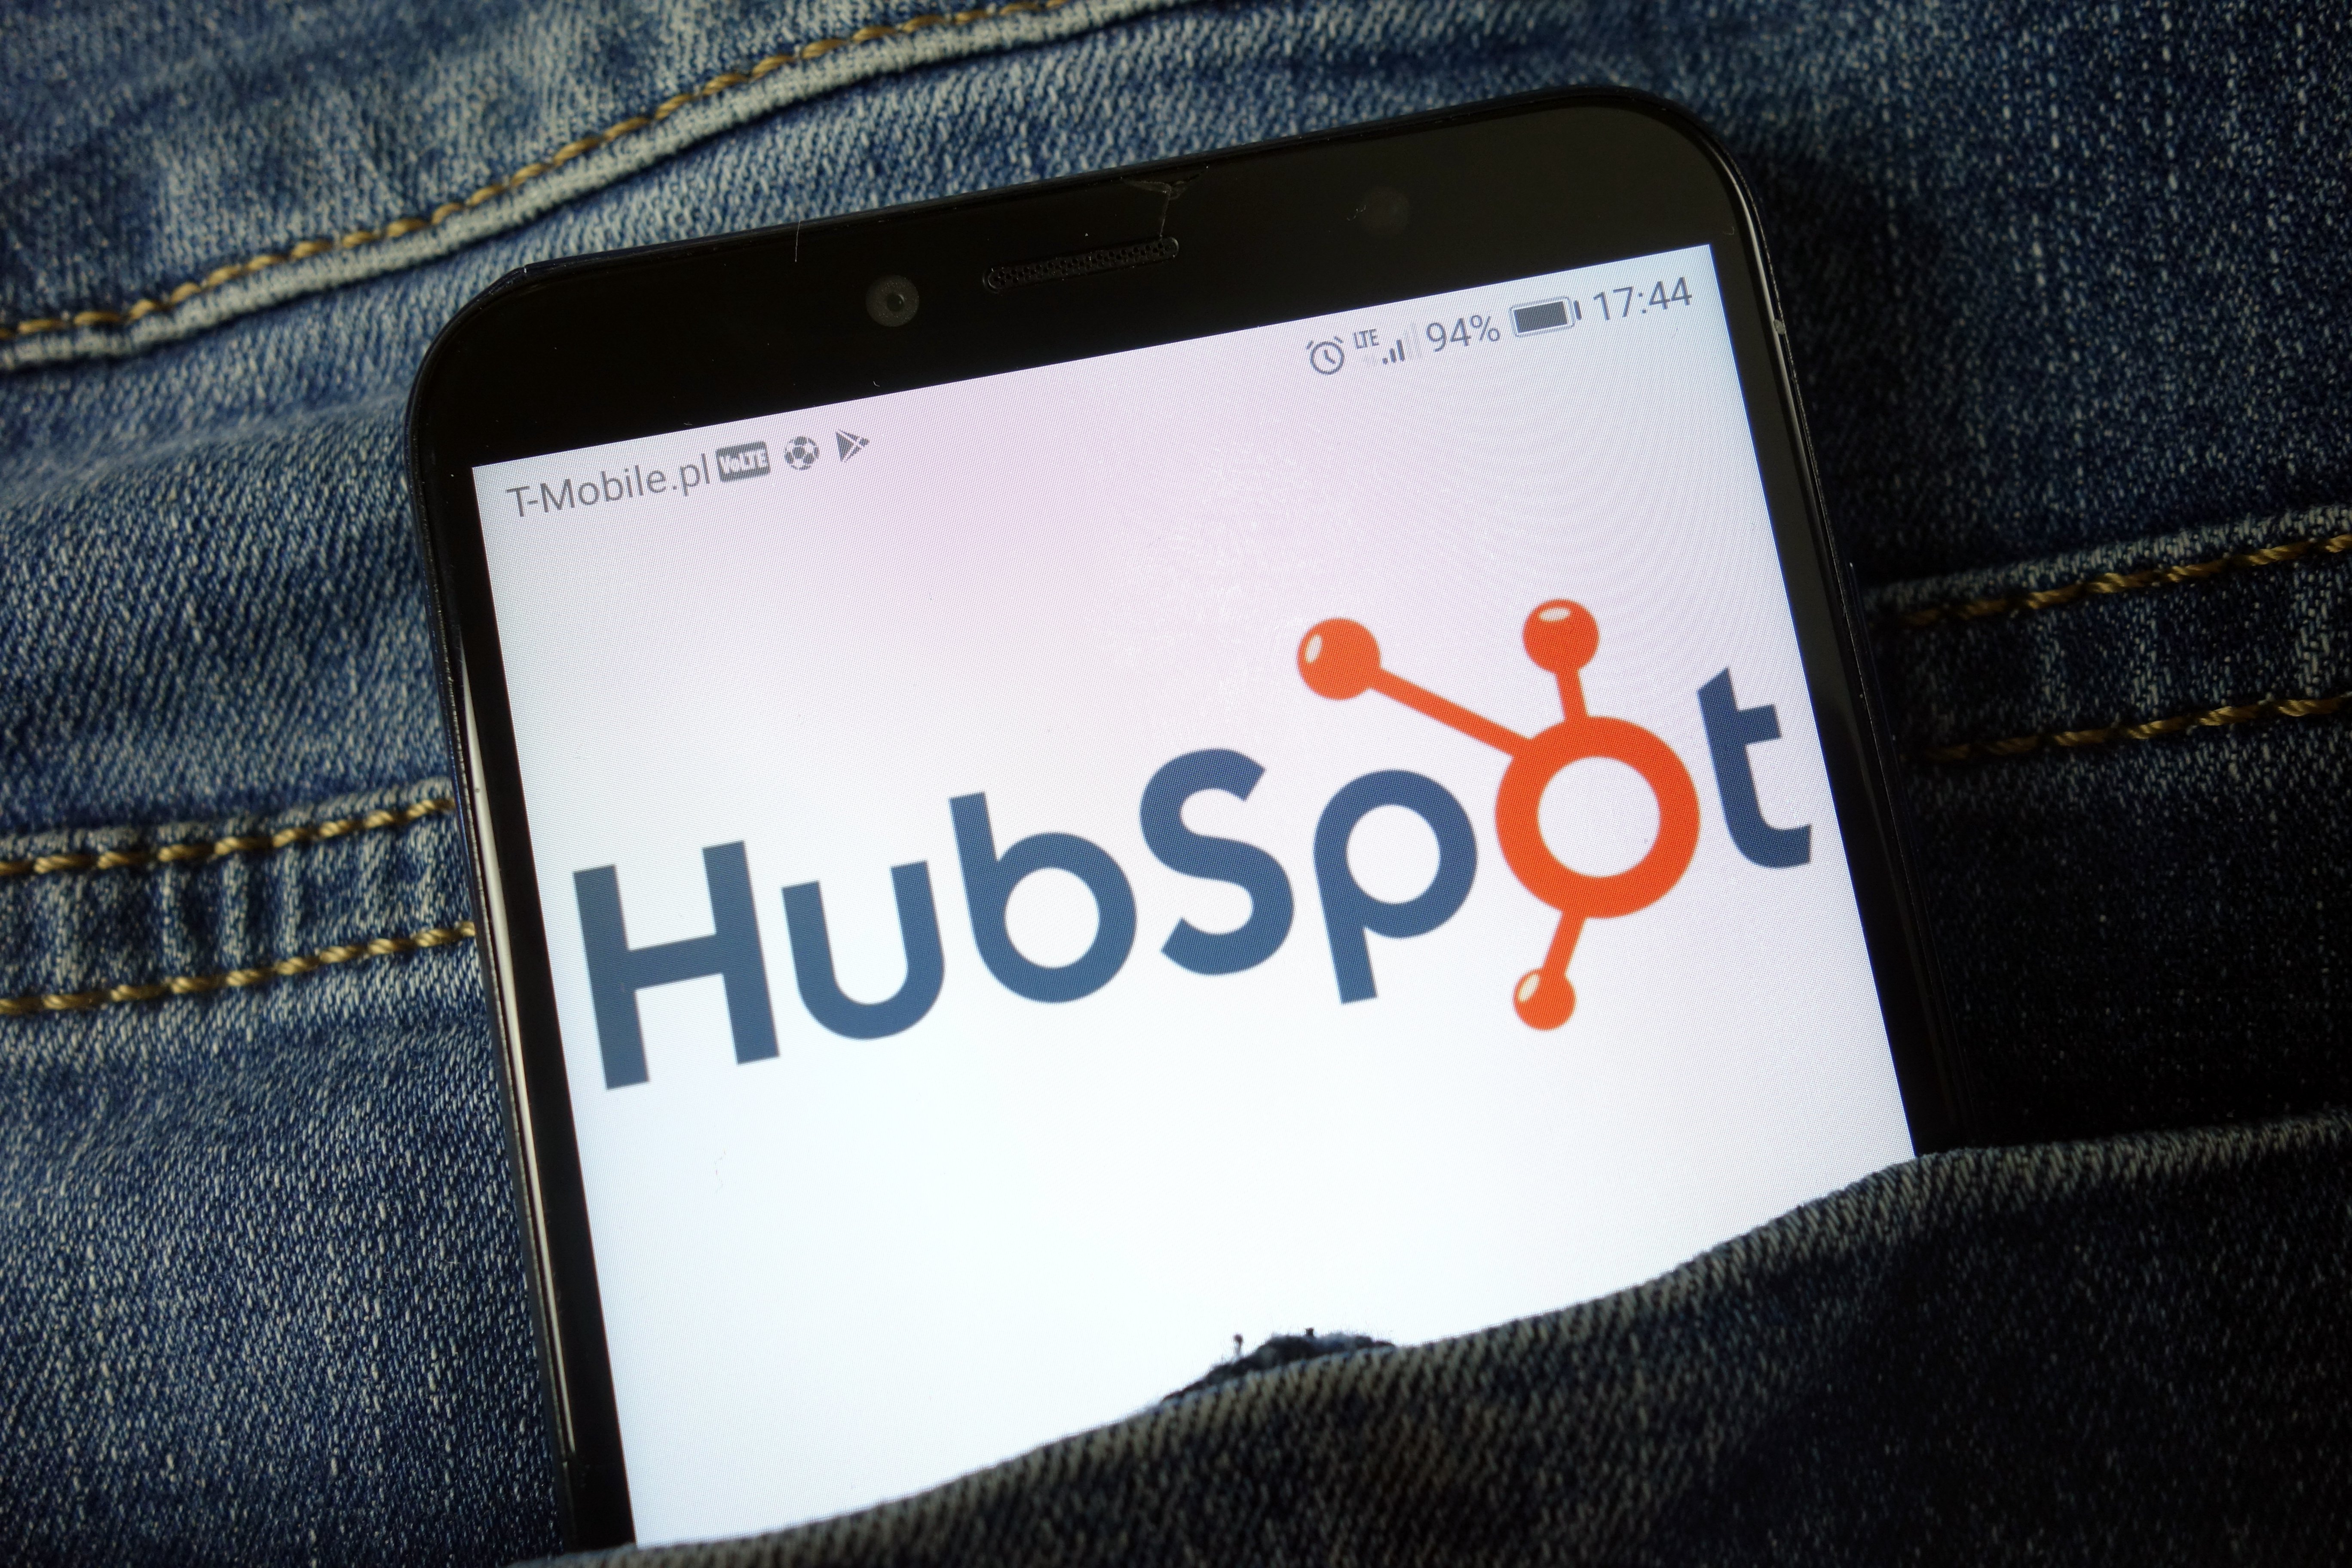 HubSpot (NYSE: HUBS) Offers Dynamic Growth at High Price: Is It Worth the Risk?